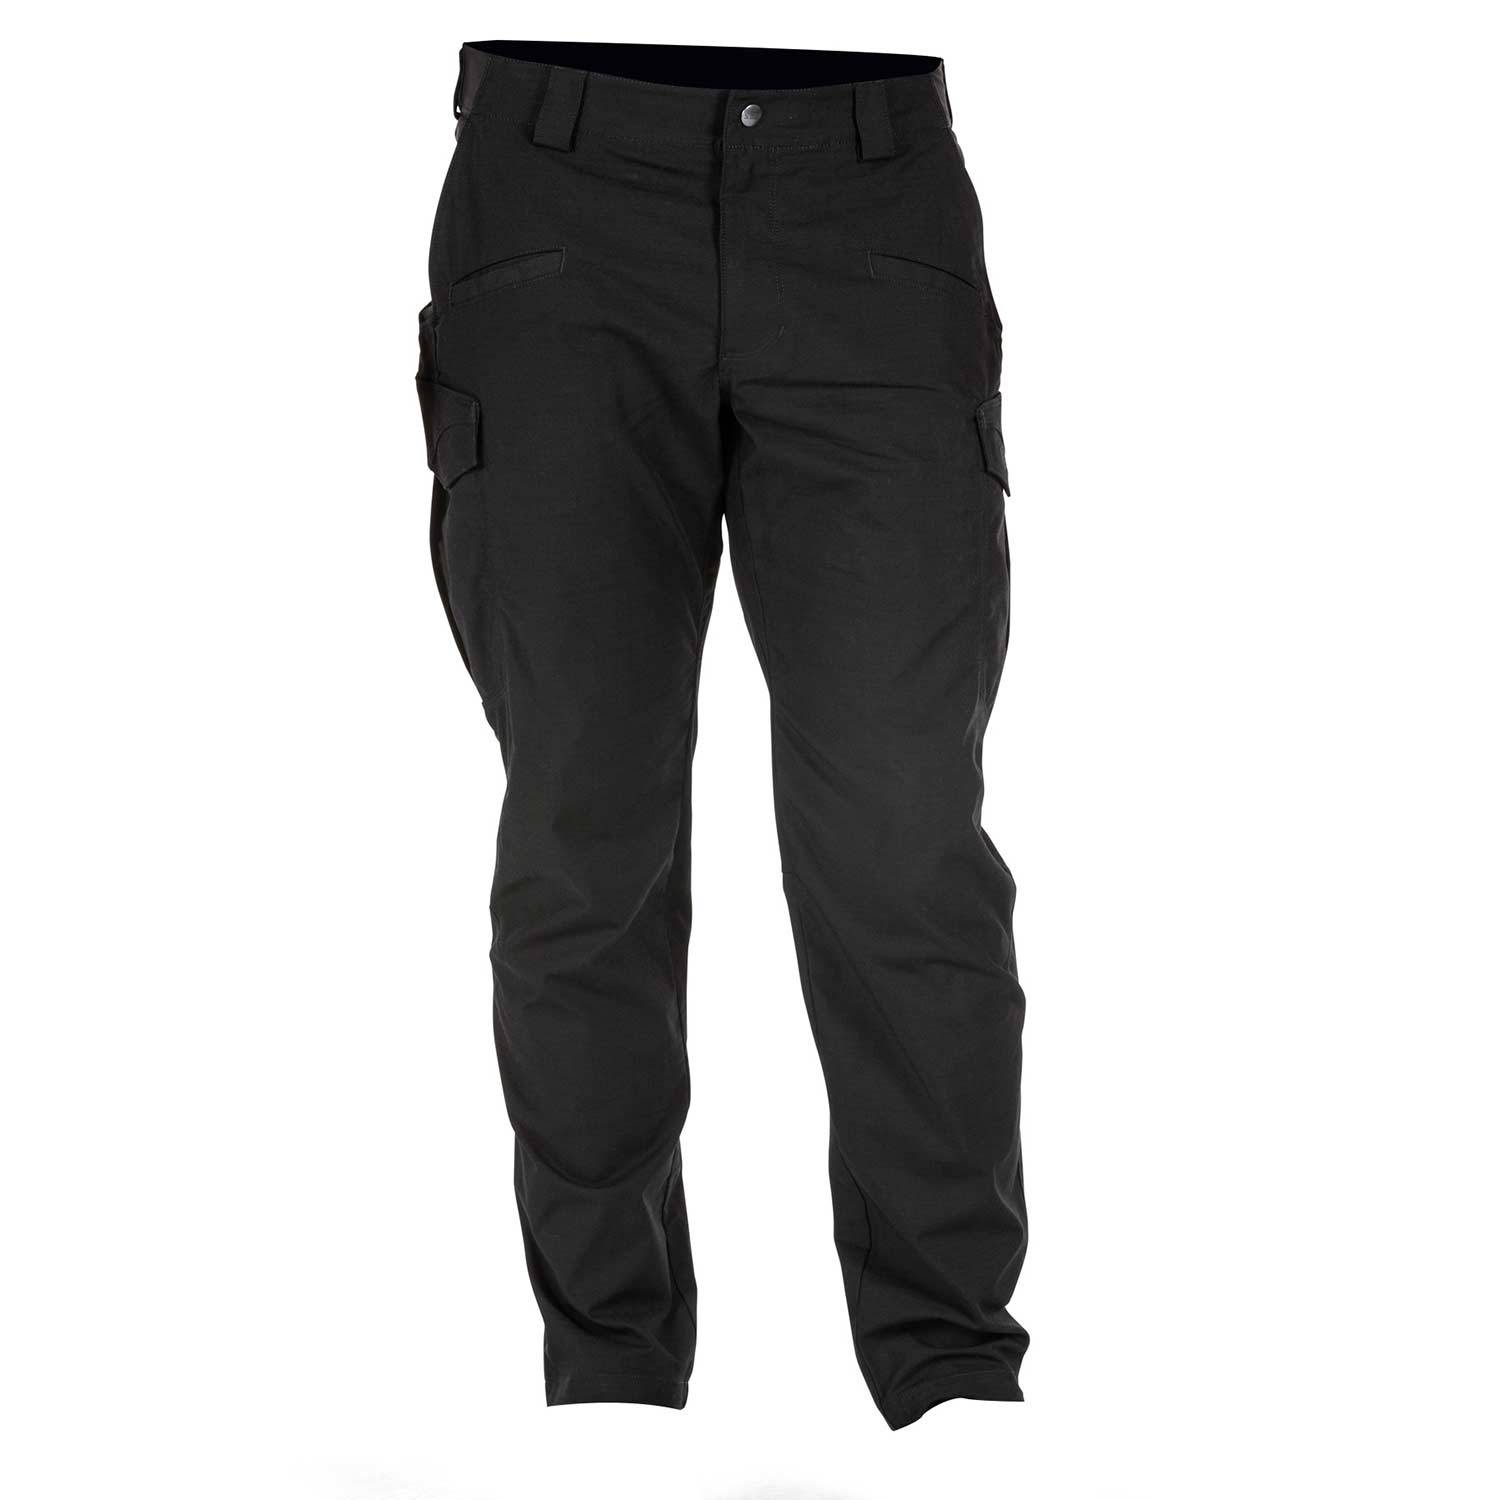 5.11 TACTICAL ICON PANTS